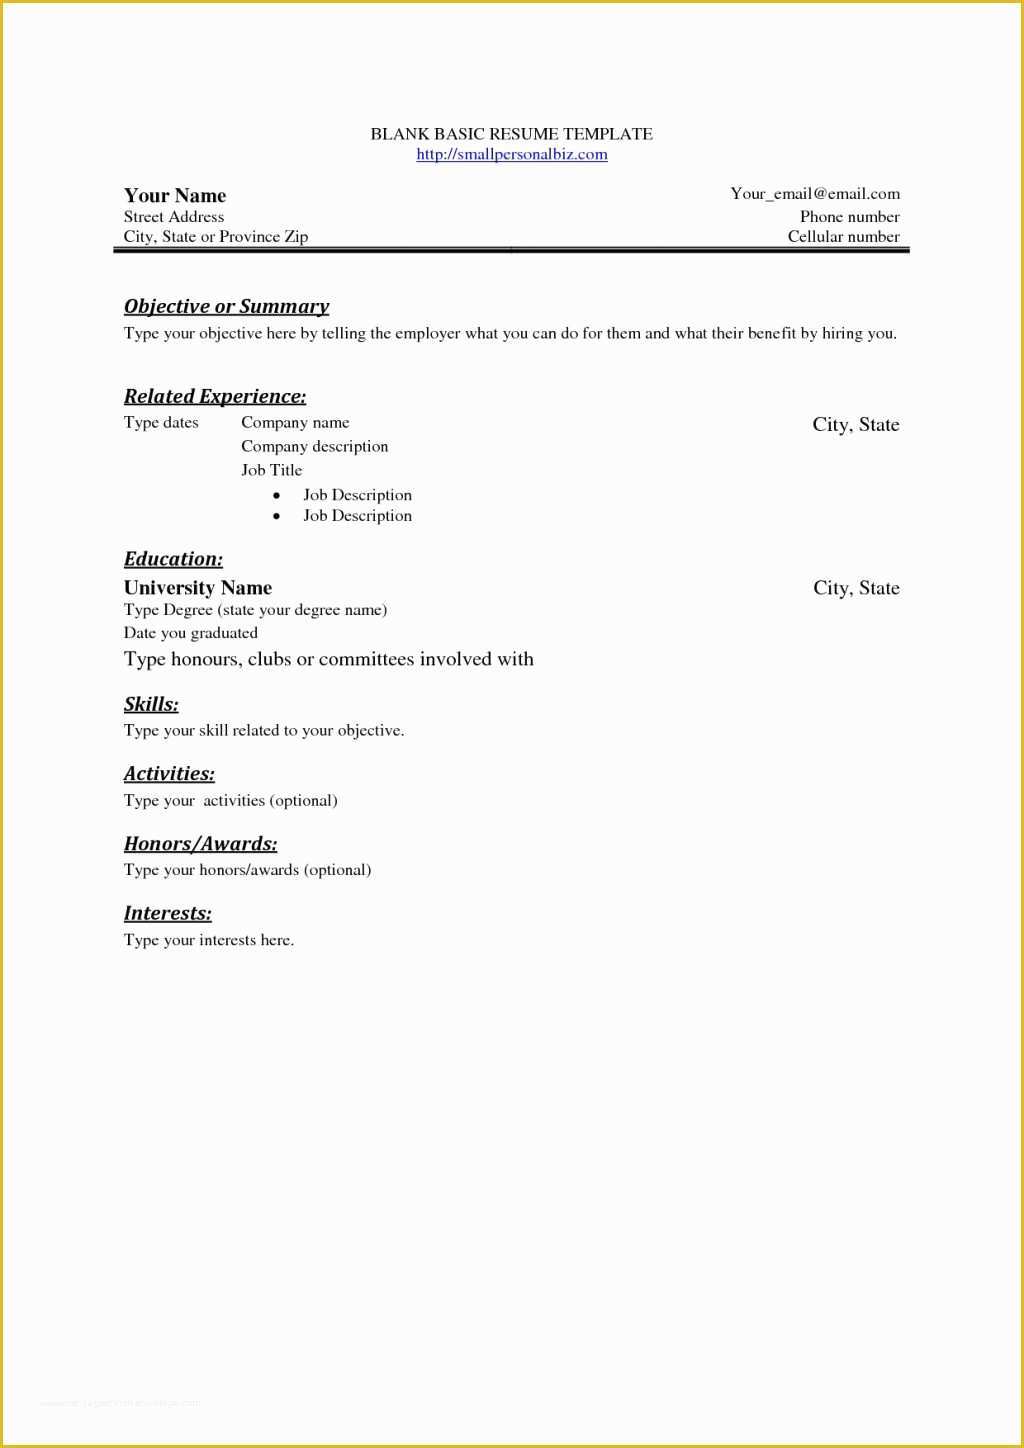 Basic Resume Template Download Free Of Free Basic Resume Template Download for Windows 10 Tag